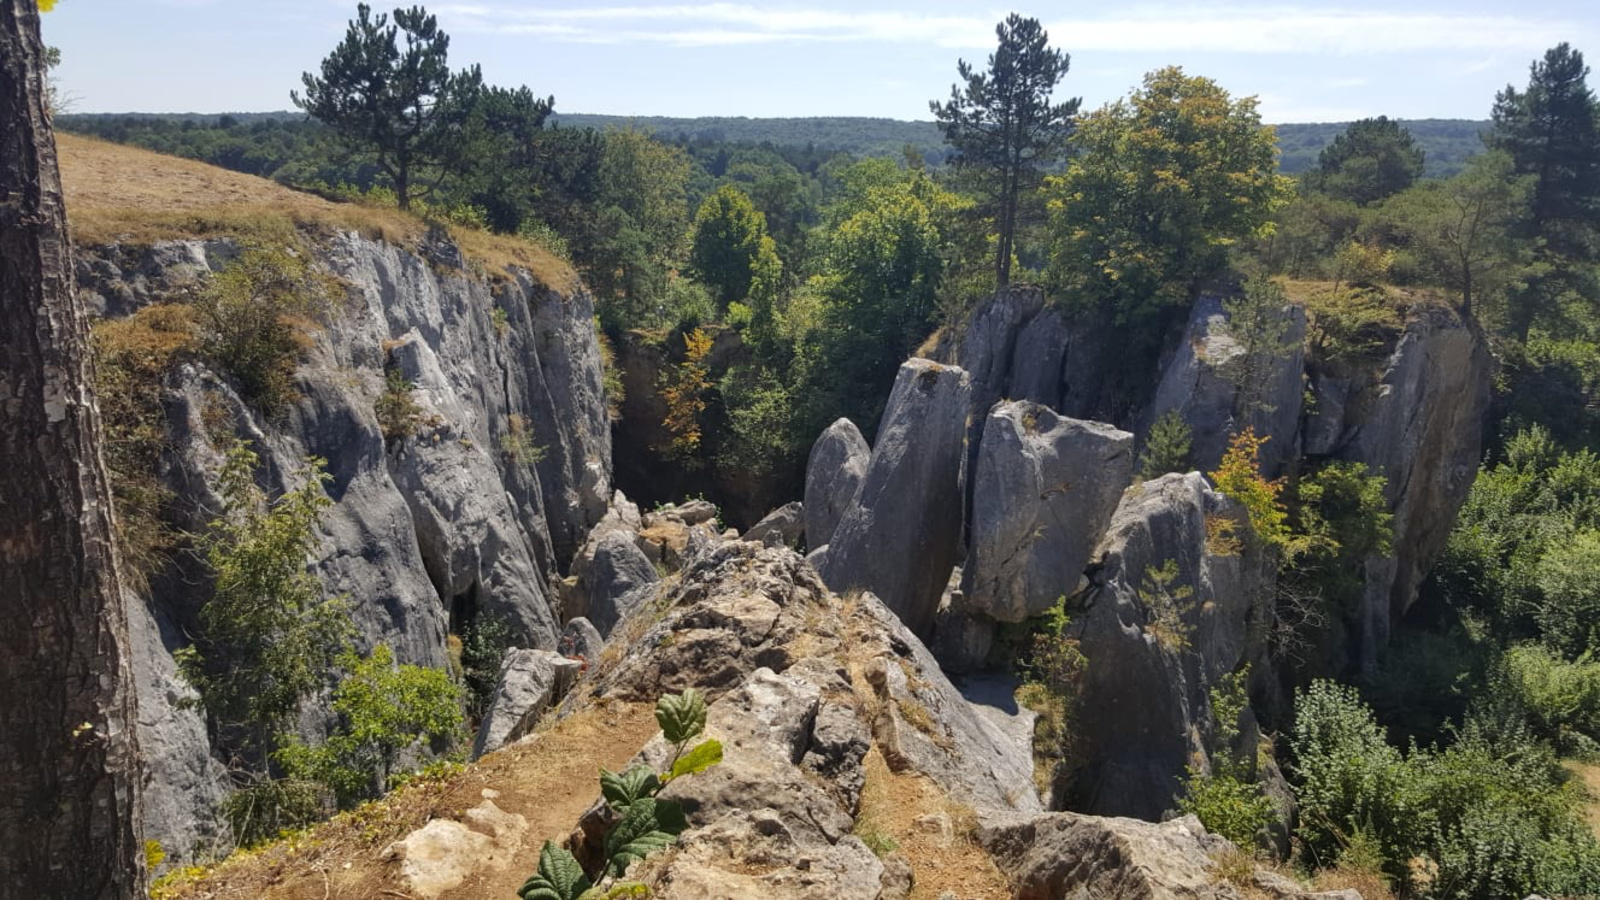 View overlooking the enormous natural chasm of Fondry des Chiens